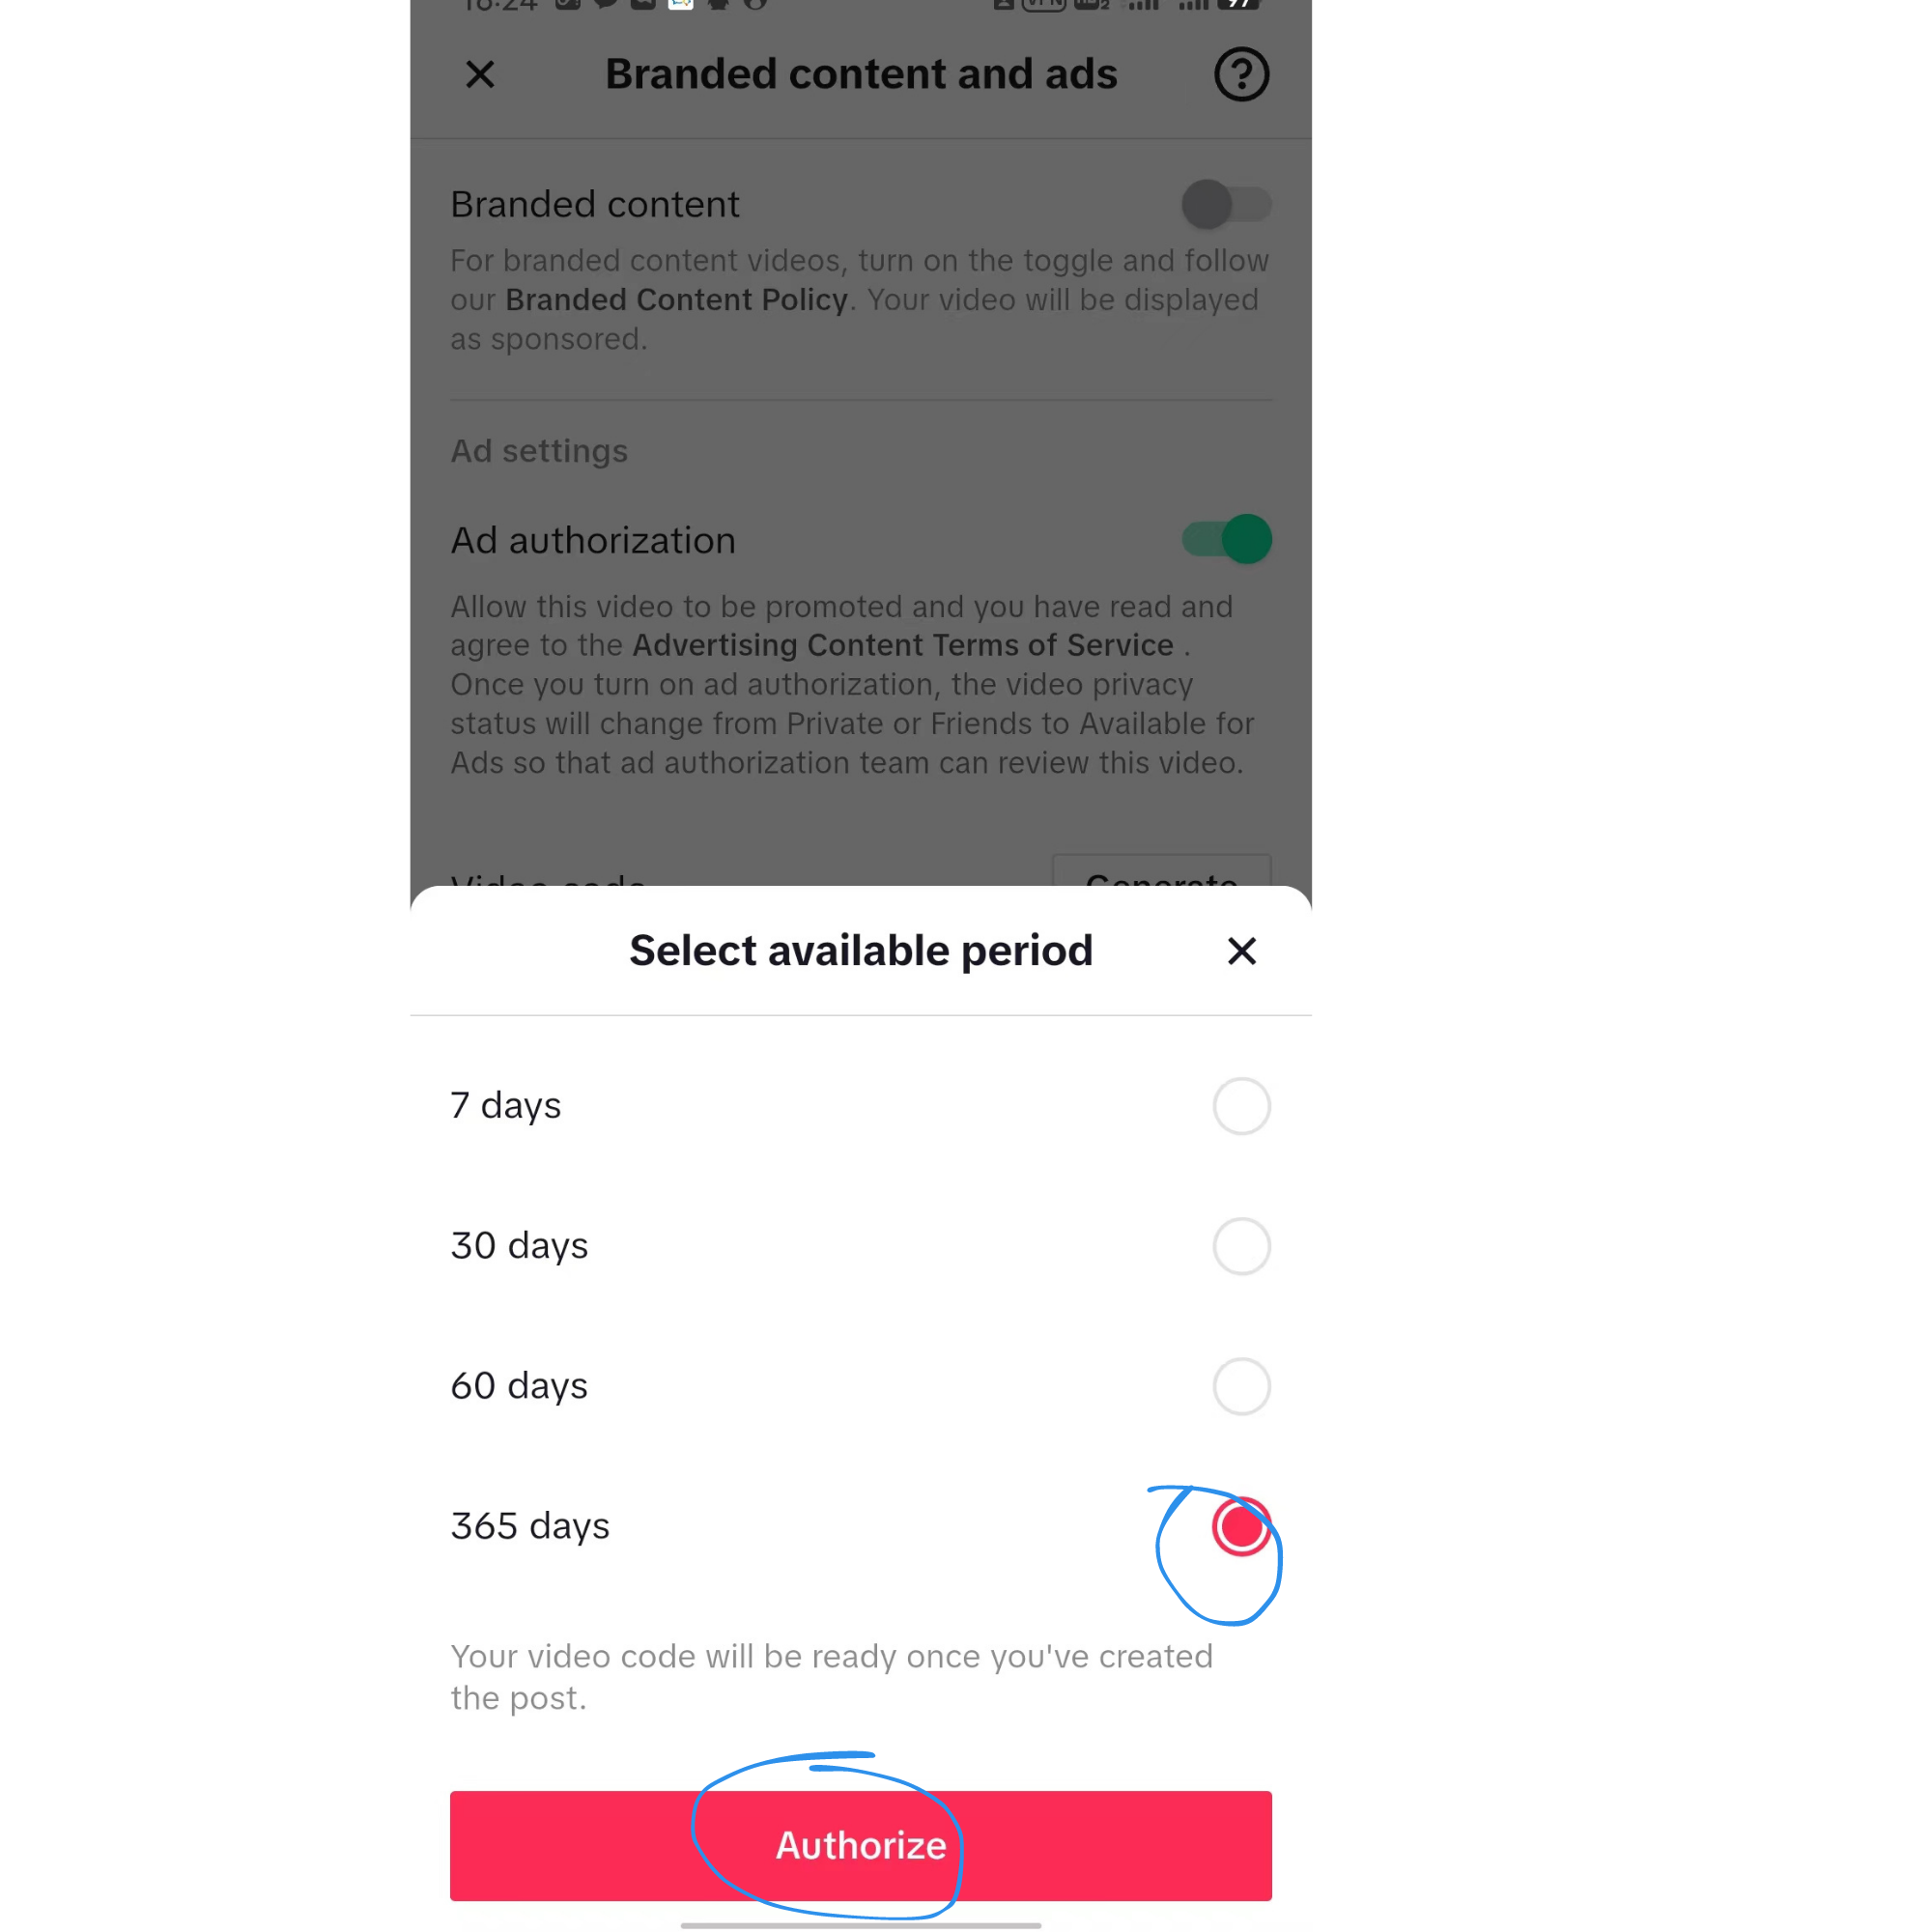 How to get the AD AUTHORIZATION code in TikTok